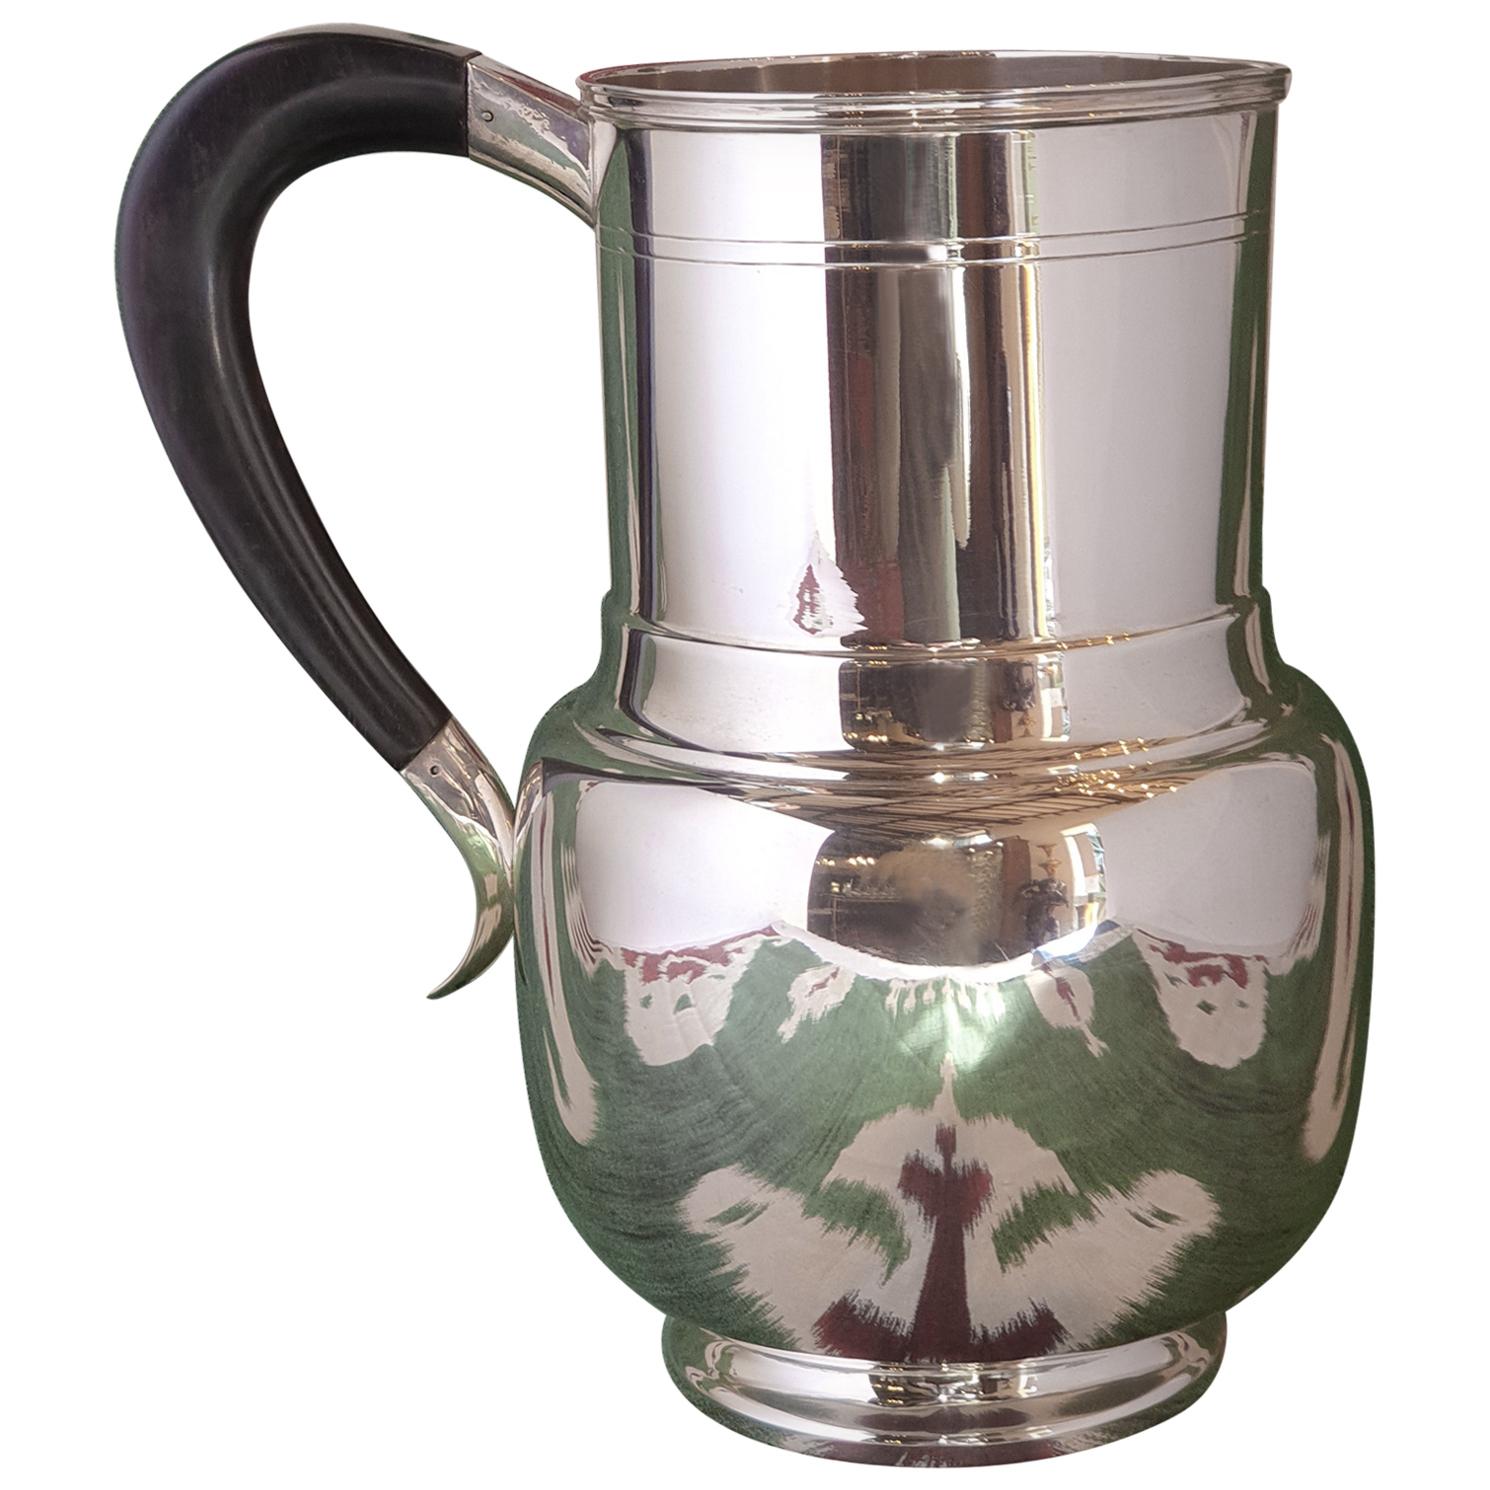 21st Century Art Deco Style Sterling Silver Water Pitcher, Italy, 2003